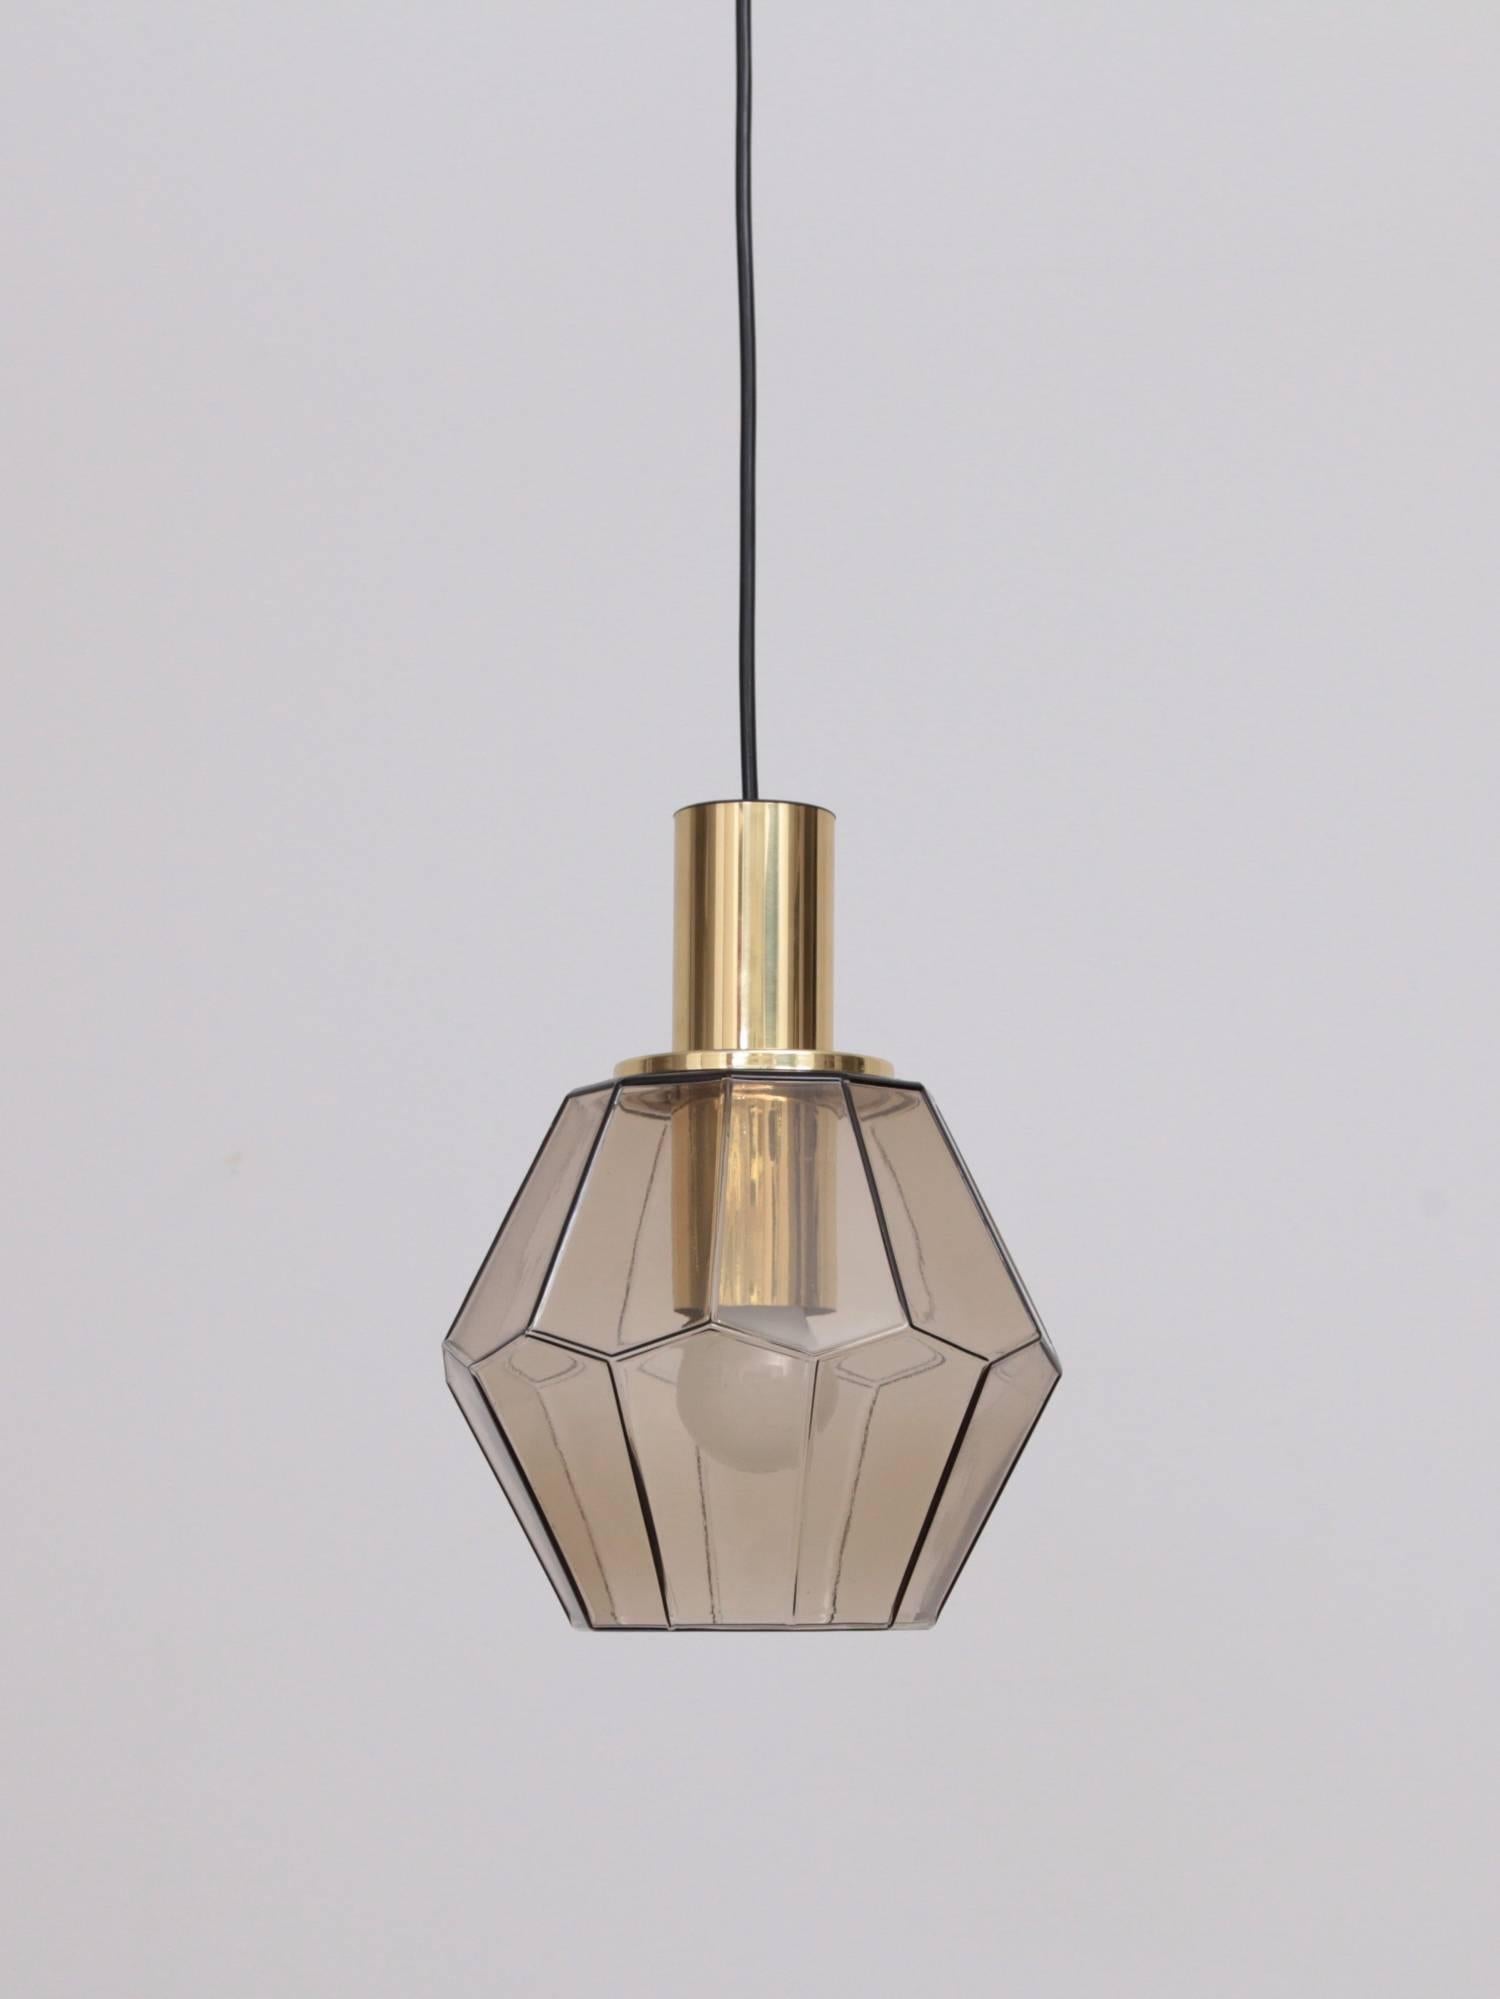 German One of 12 Elegant Brass and Smoked Glass Pendant Lamp, 1960s